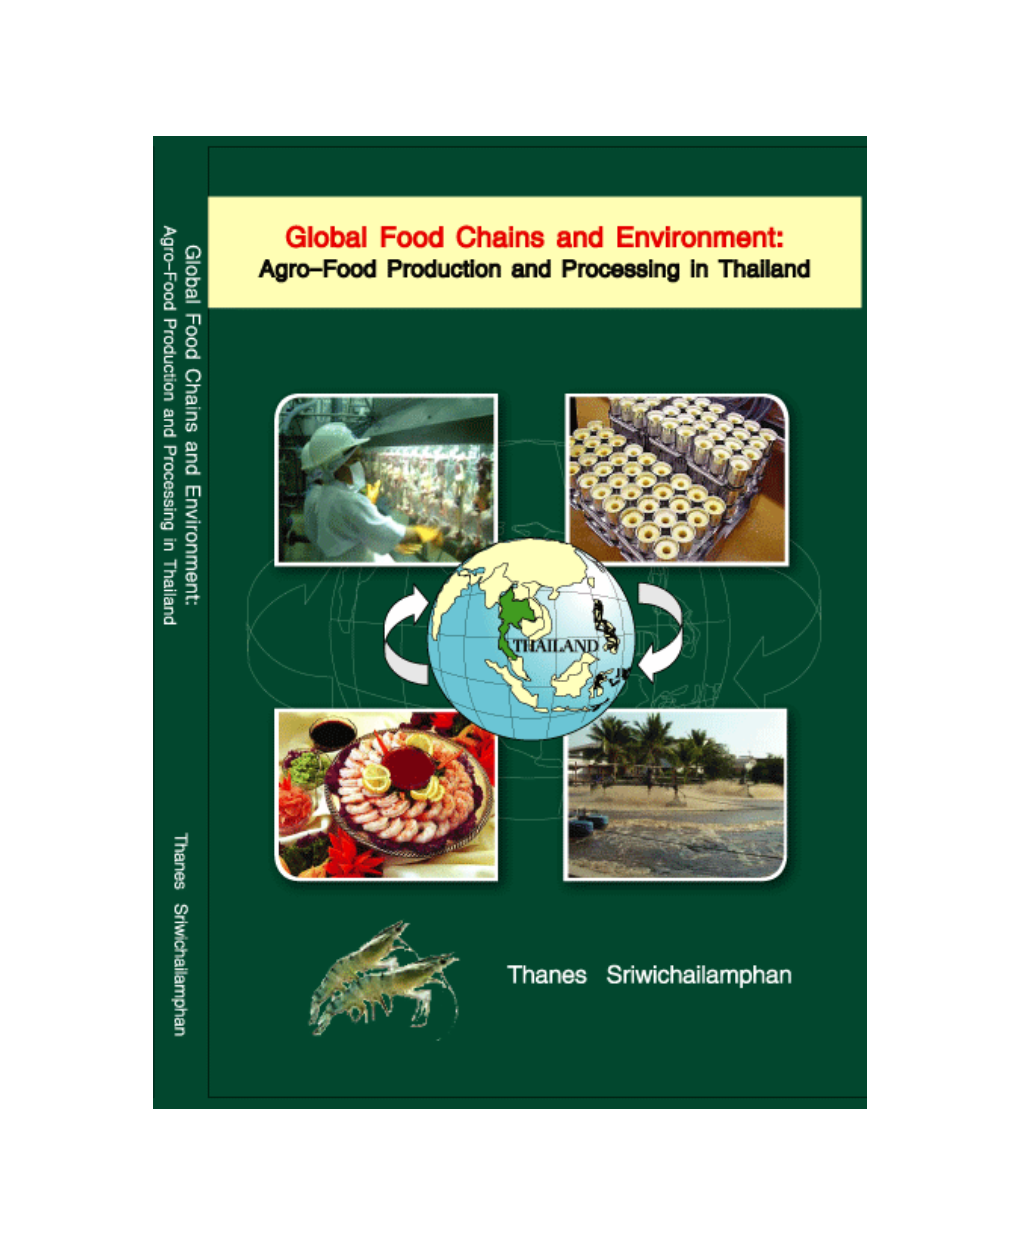 Global Food Chains and Environment: Agro-Food Production and Processing in Thailand